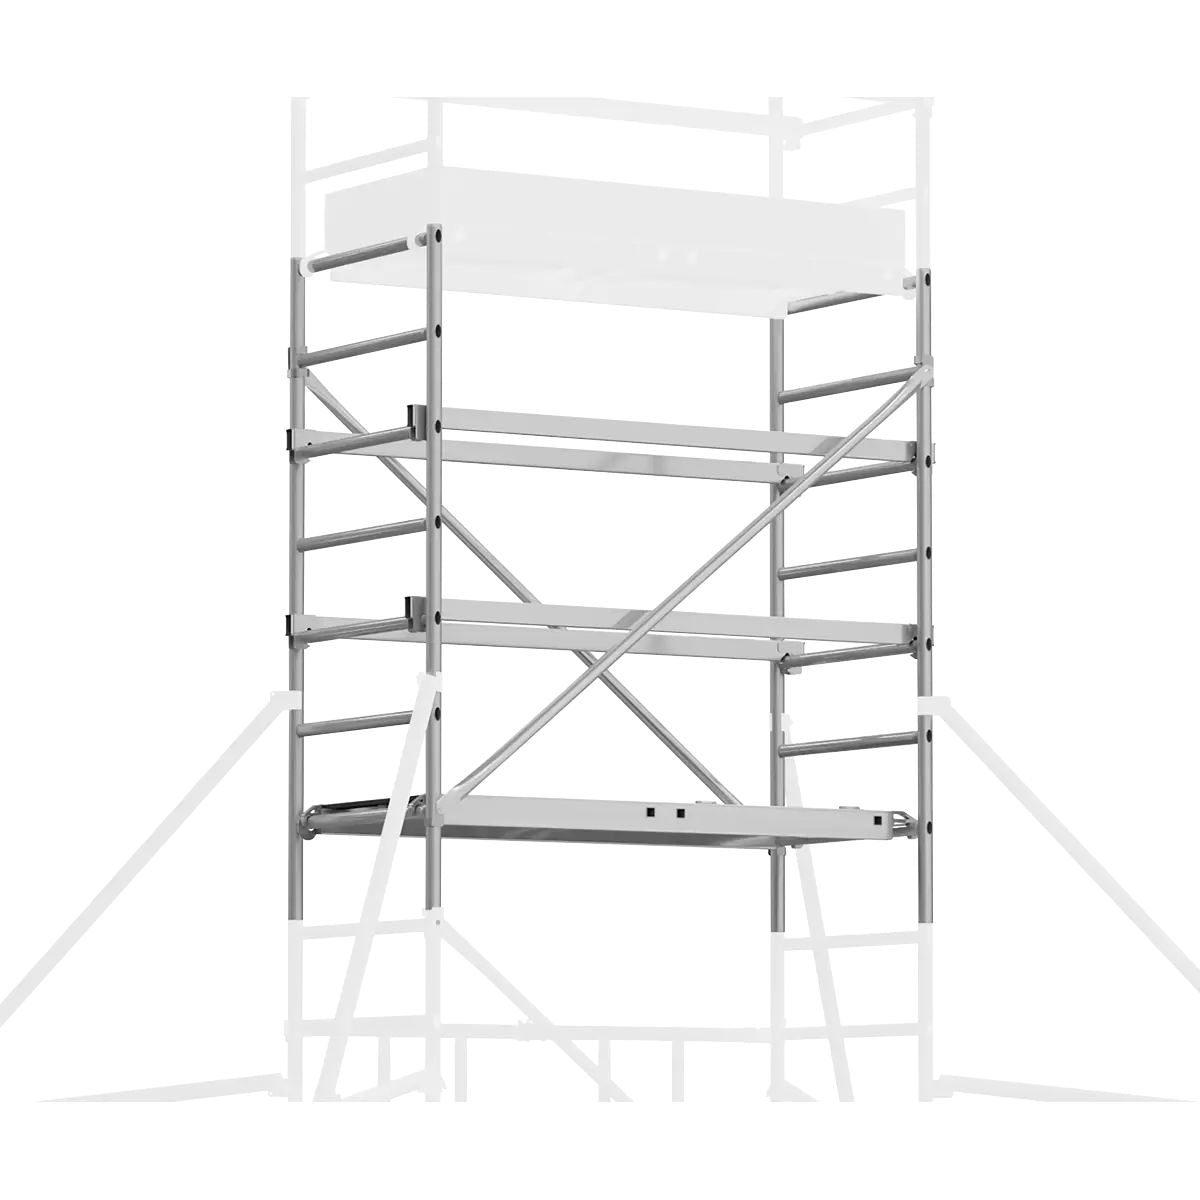 Sealey SSCL3 Platform Scaffold Tower Extension Pack 3